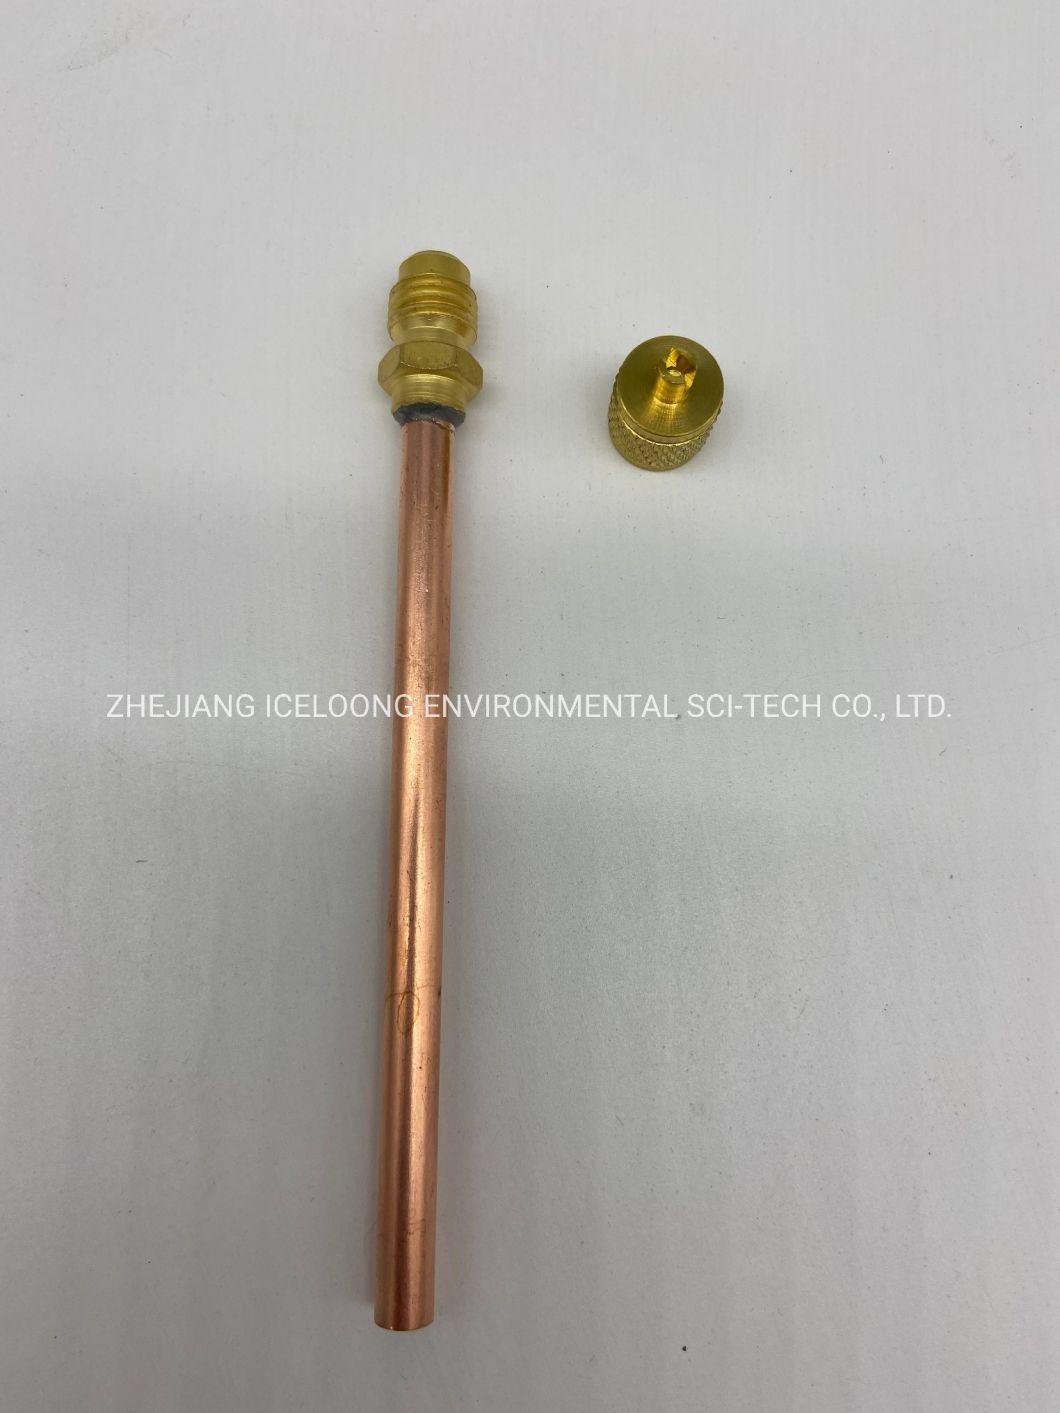 1/4 Copper Access Service Valve for Refrigeration and Air Conditioning Use